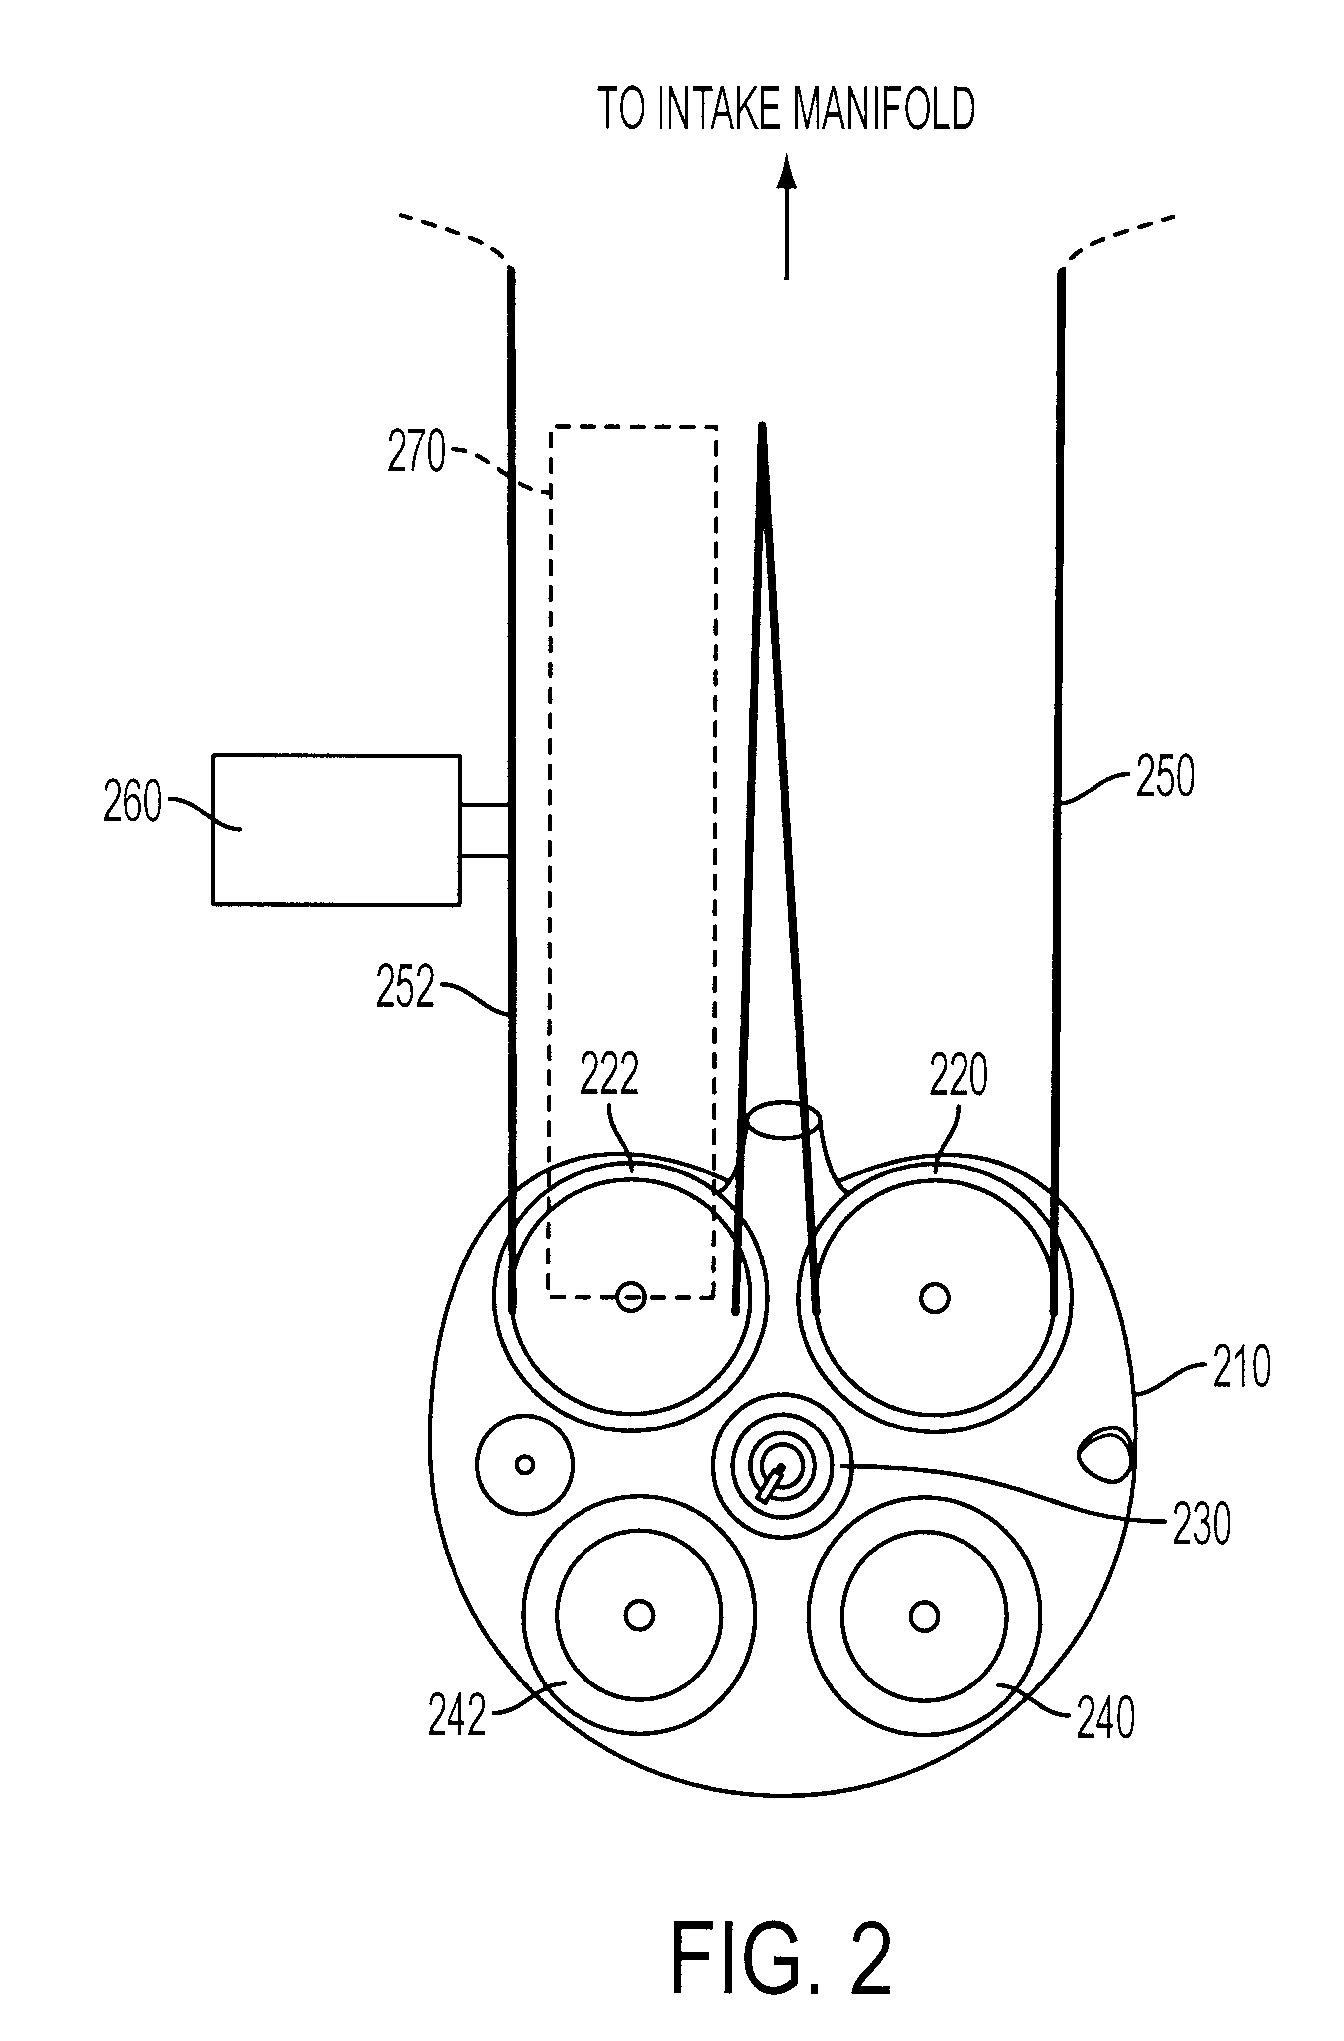 Staggered Intake Valve Opening with Bifurcated Port to Eliminate Hydrogen Intake Backfire